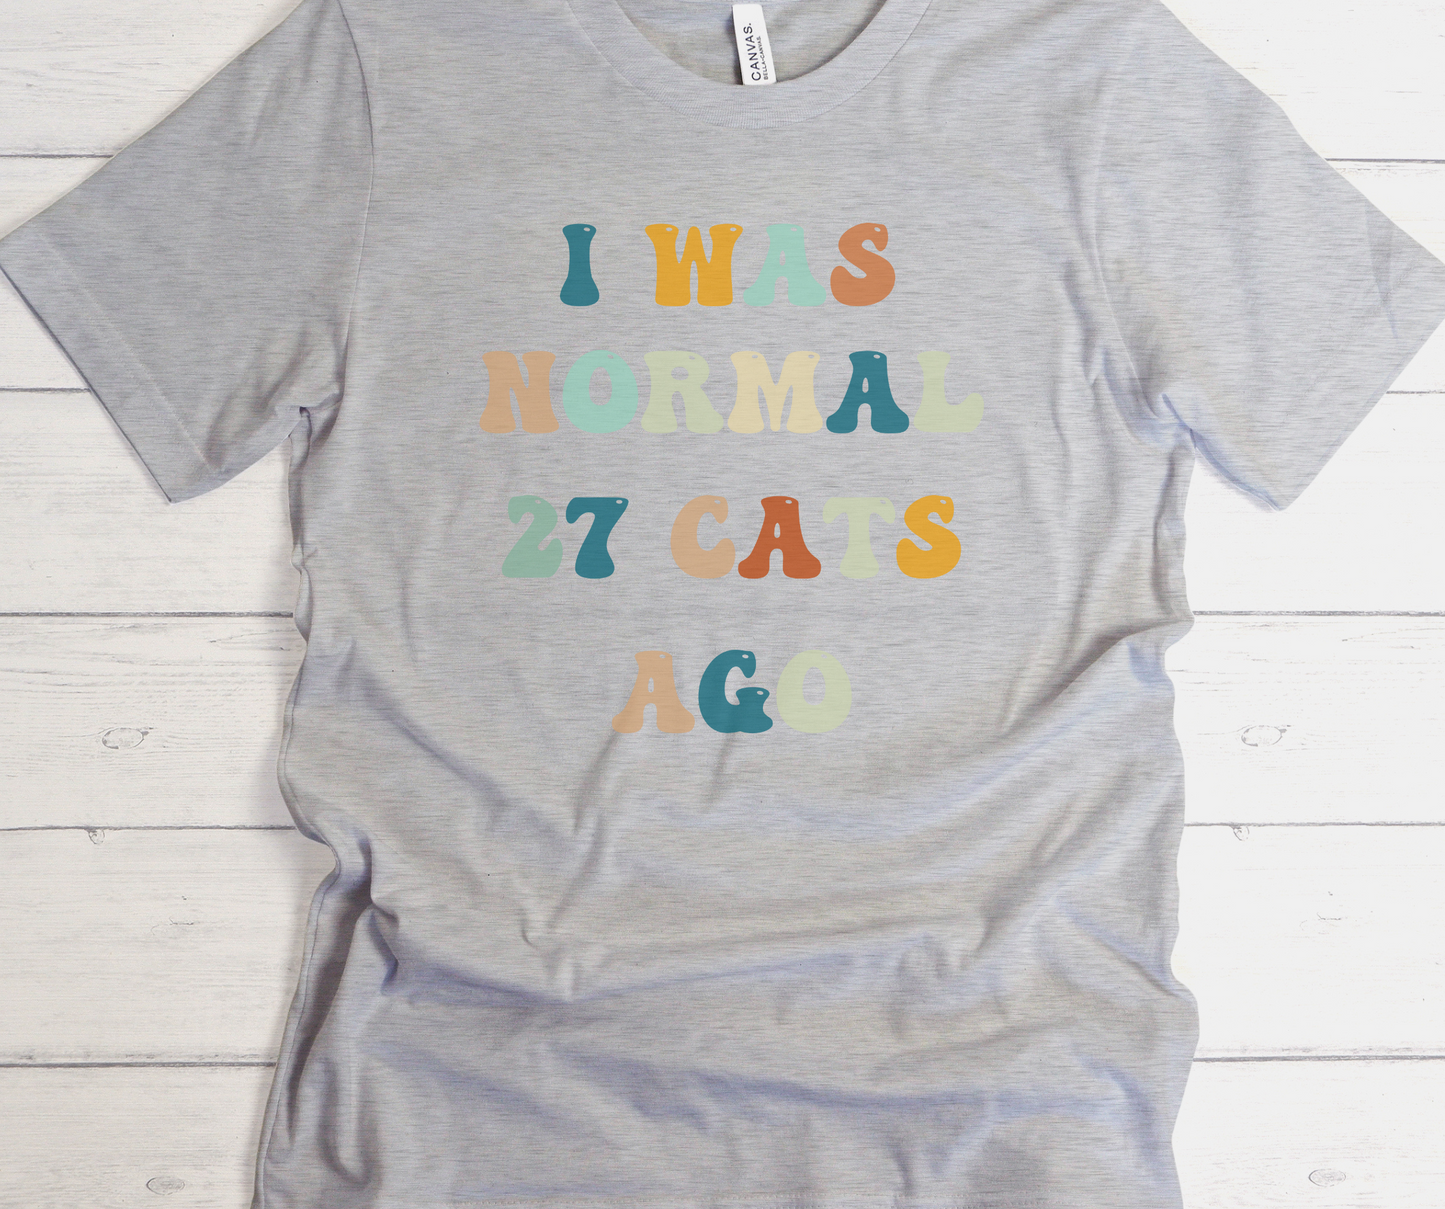 I Was Normal 27 Cats Ago Shirt